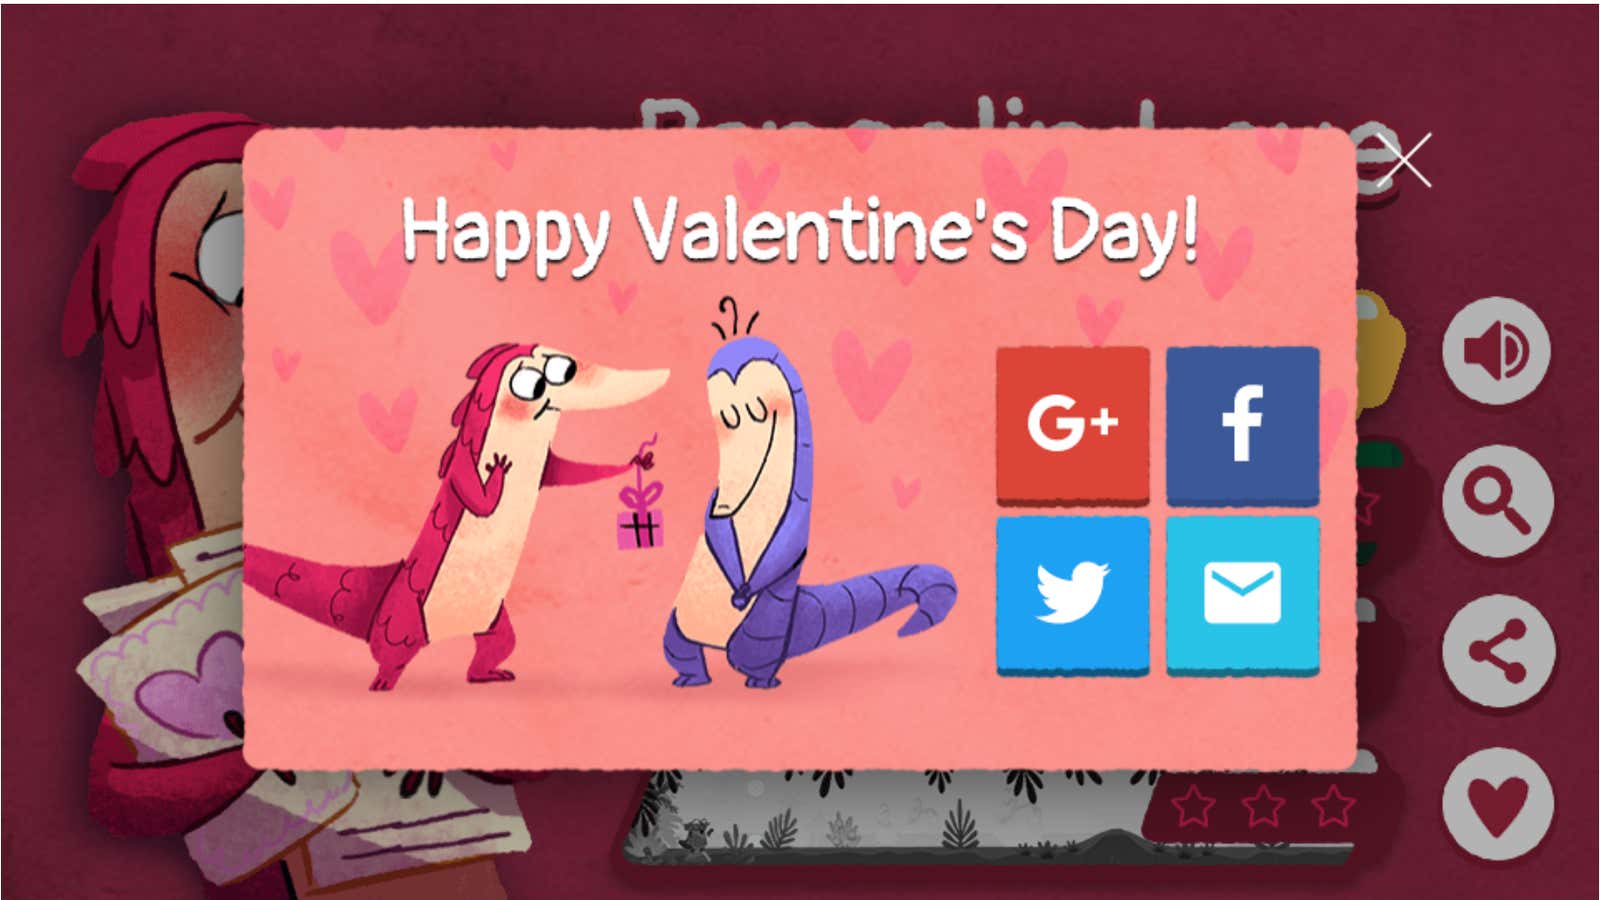 World Pangolin Day Google's Valentine's Day doodle is a love letter to